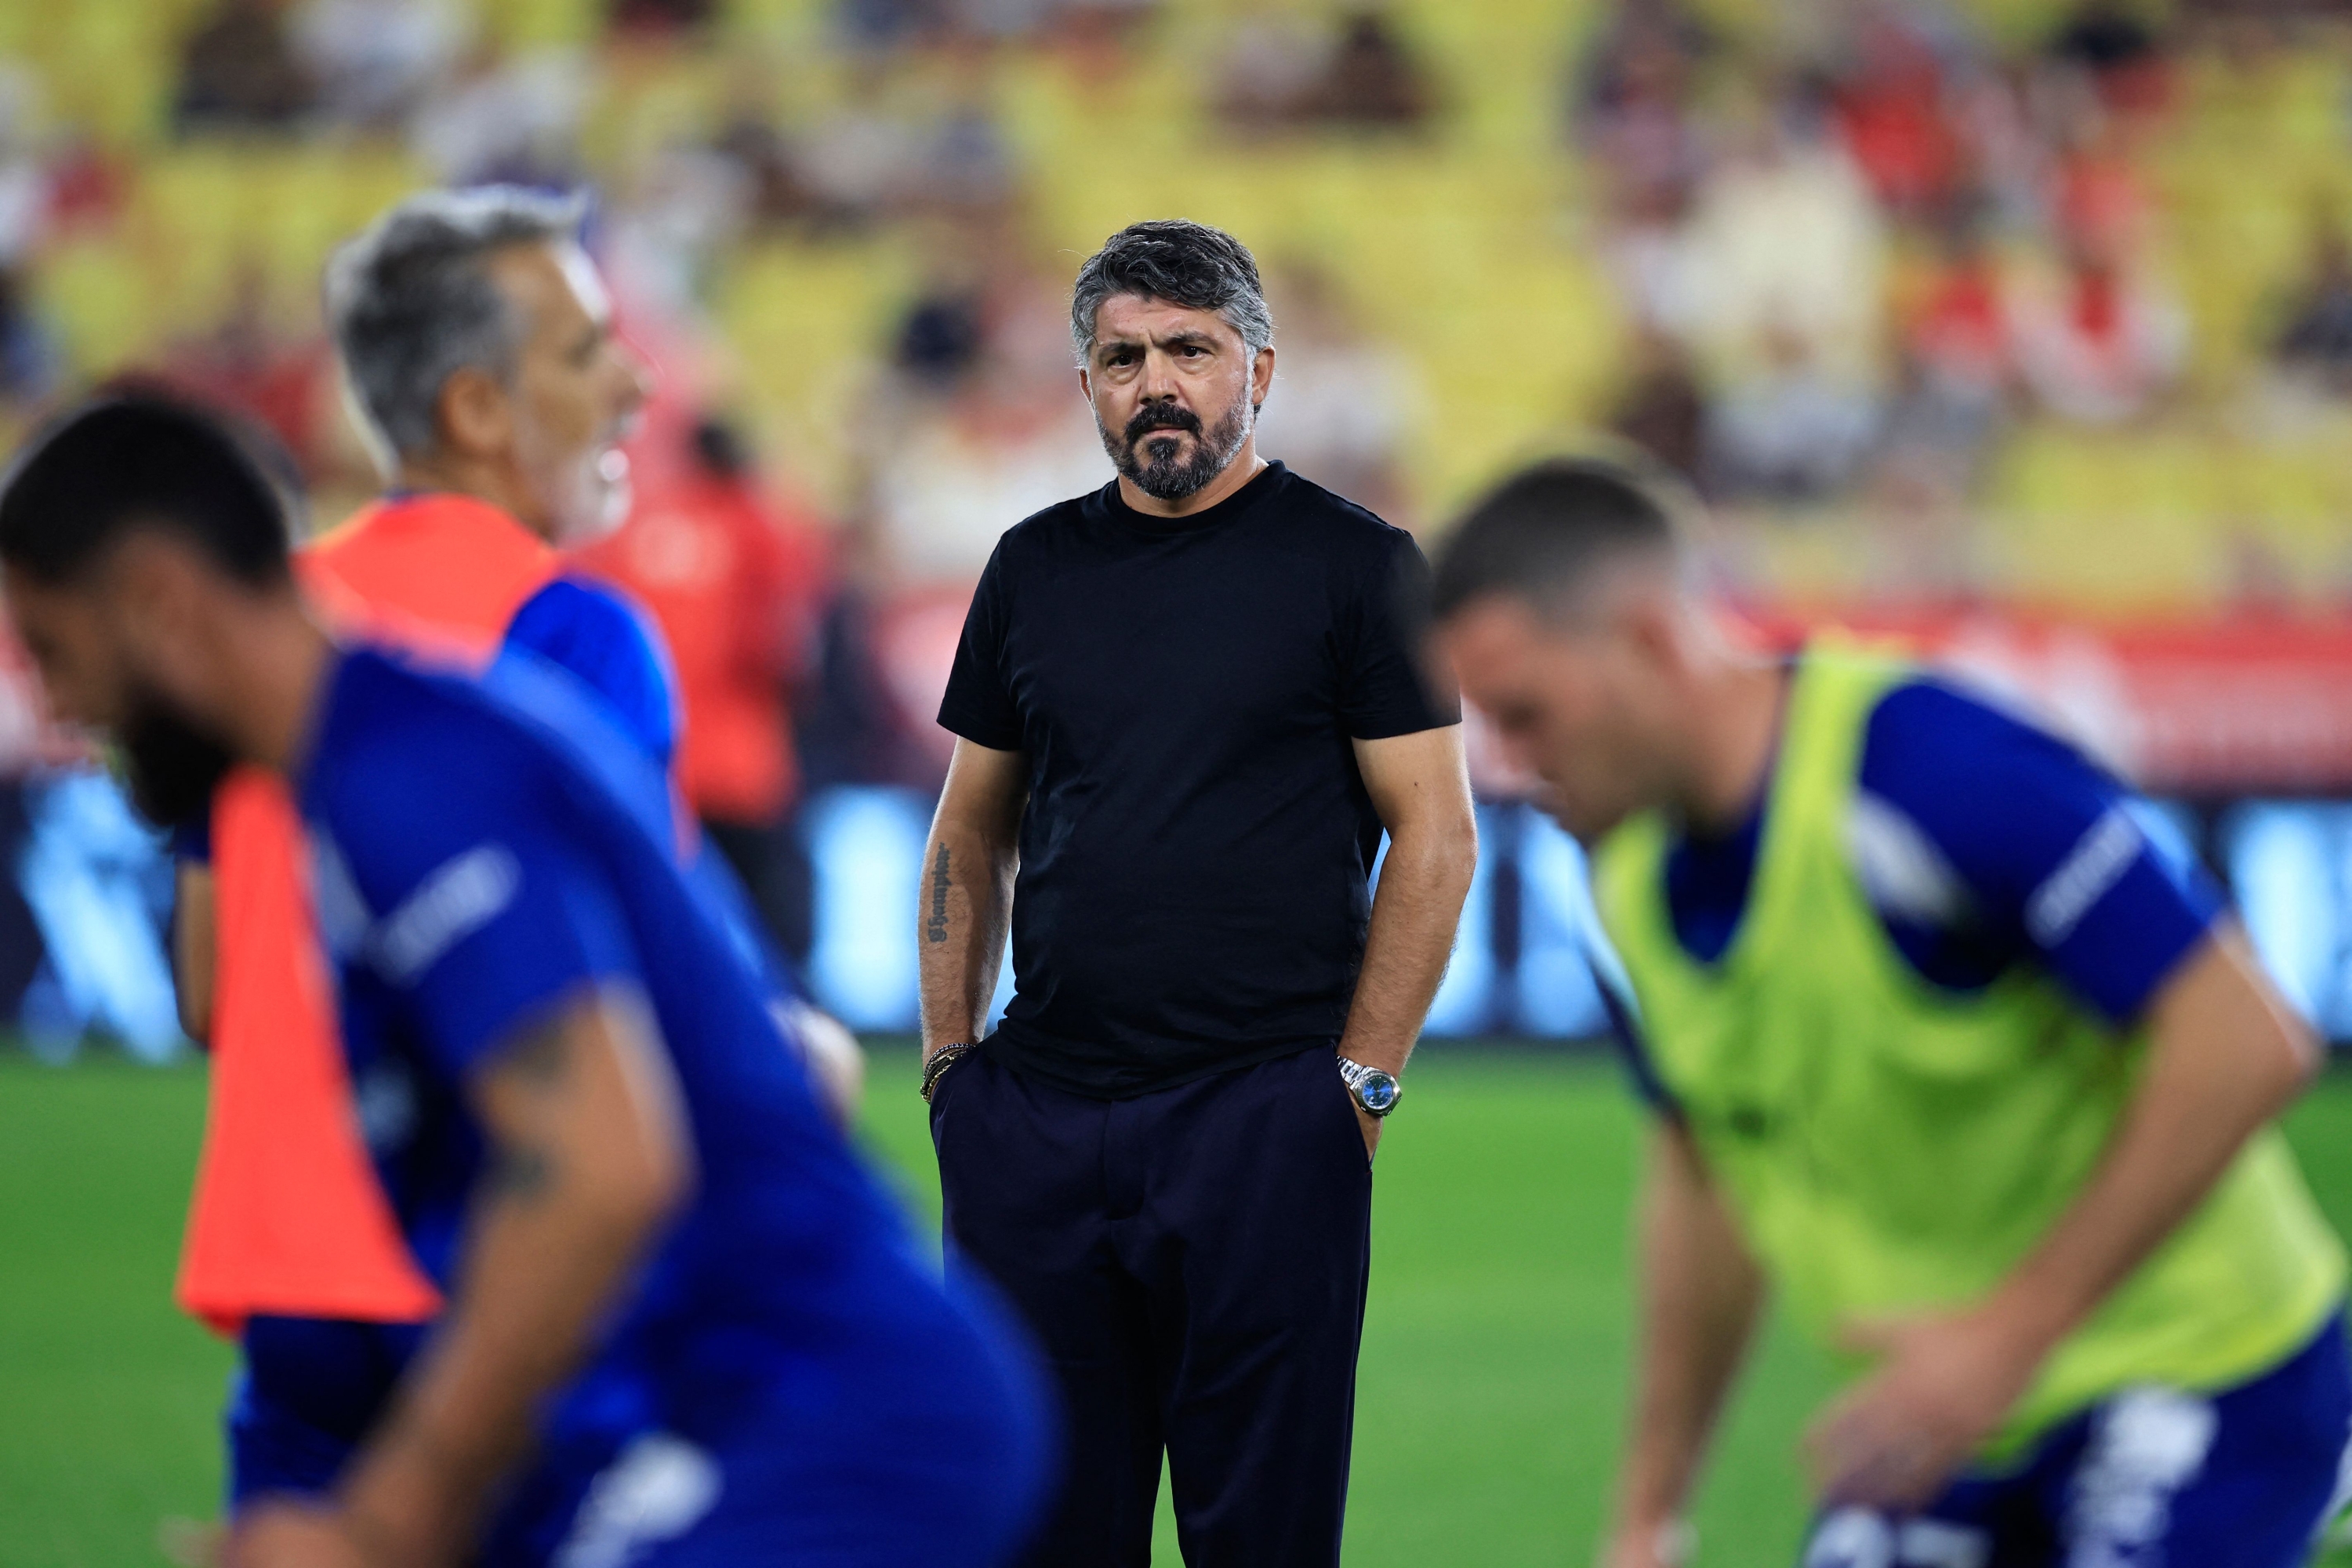 Marseille's Italian head coach Gennaro Gattuso looks at his players as they warm up prior to the start of the French L1 football match between AS Monaco and Olympique Marseille (OM) at the Louis II Stadium (Stade Louis II) in the Principality of Monaco on September 30, 2023. (Photo by Valery HACHE / AFP)